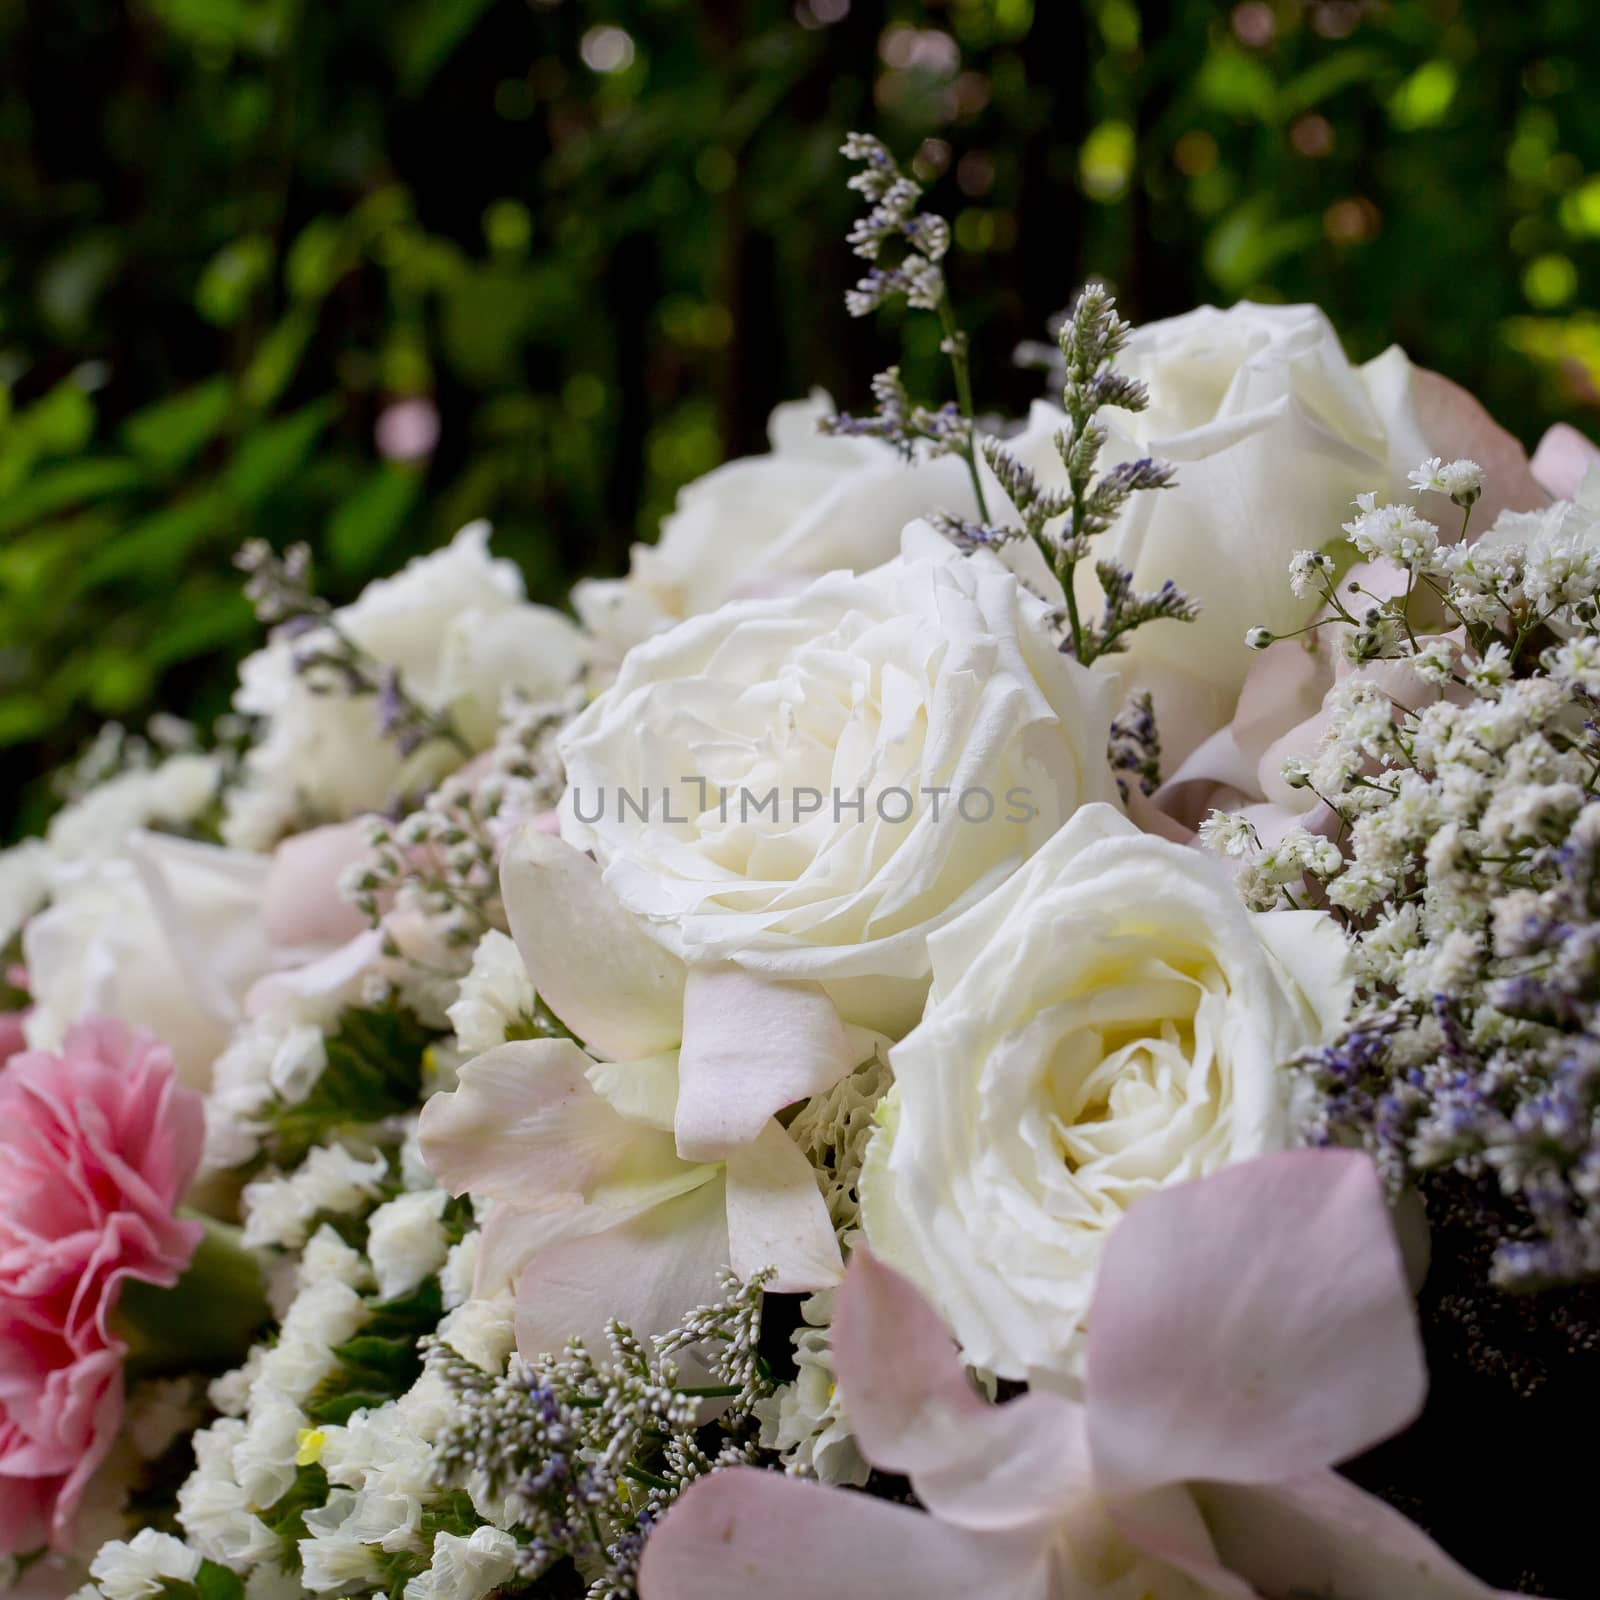 Focus beautiful white roses bouquet by art9858